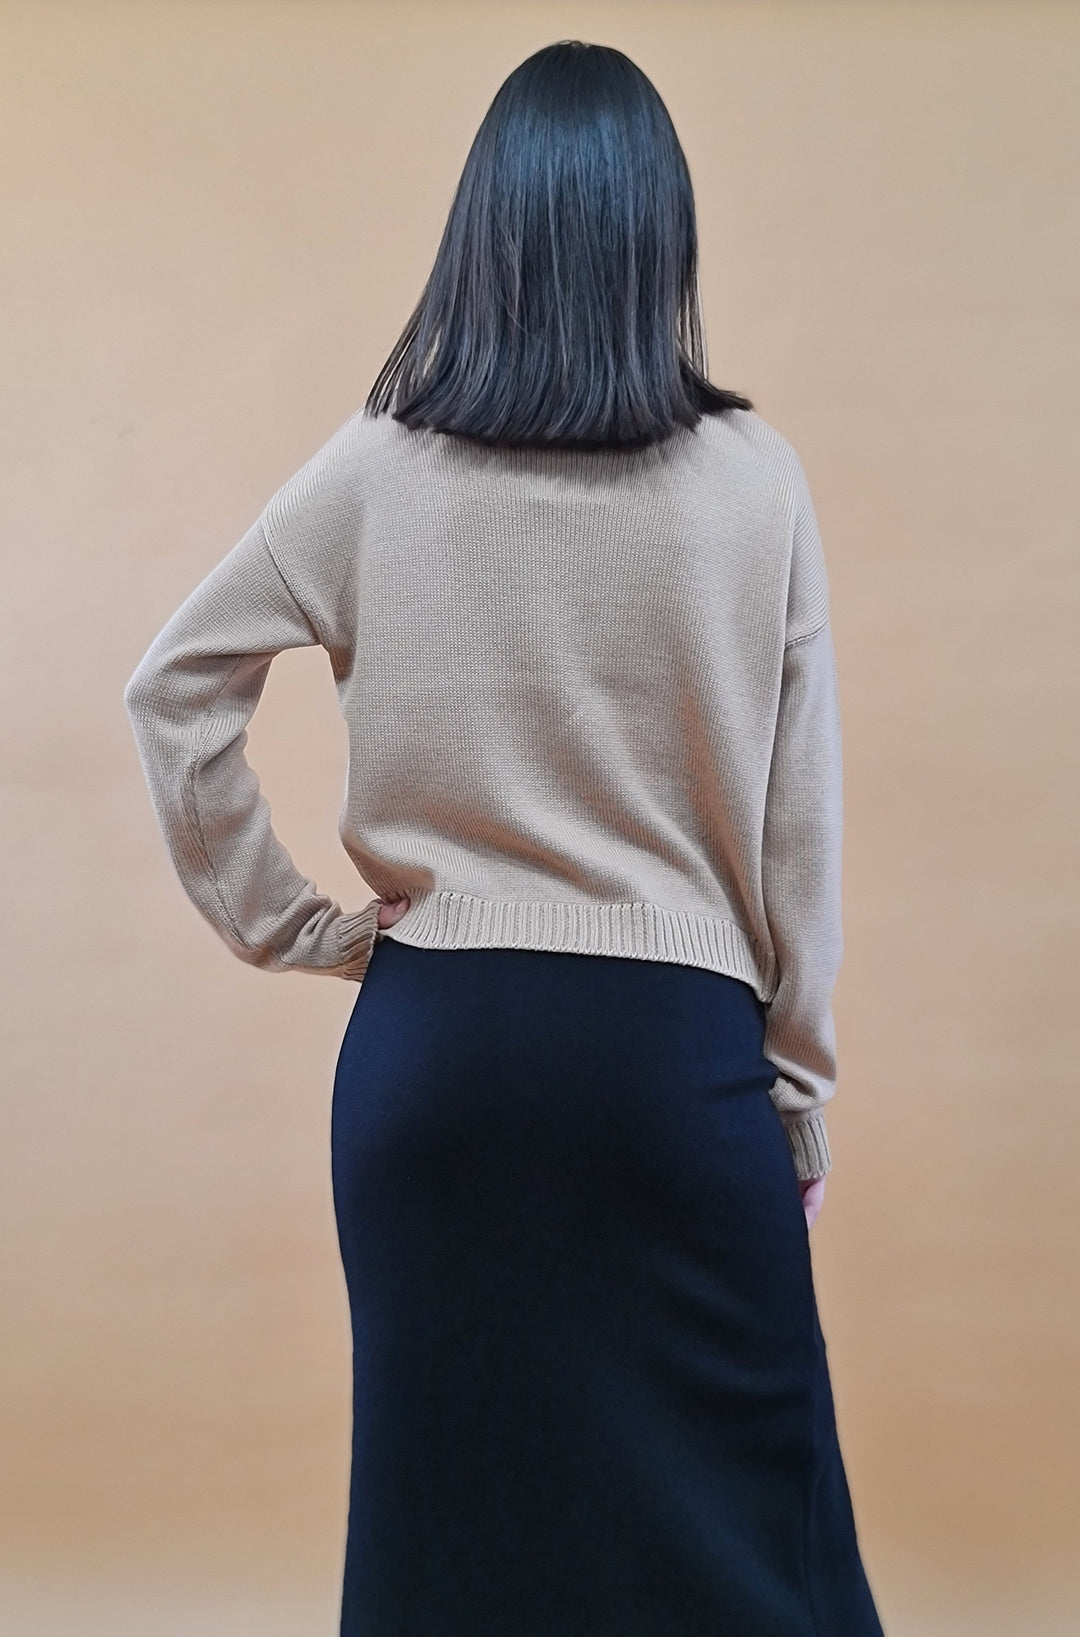 Woman with medium-length black hair facing away, wearing a beige knit sweater and black skirt